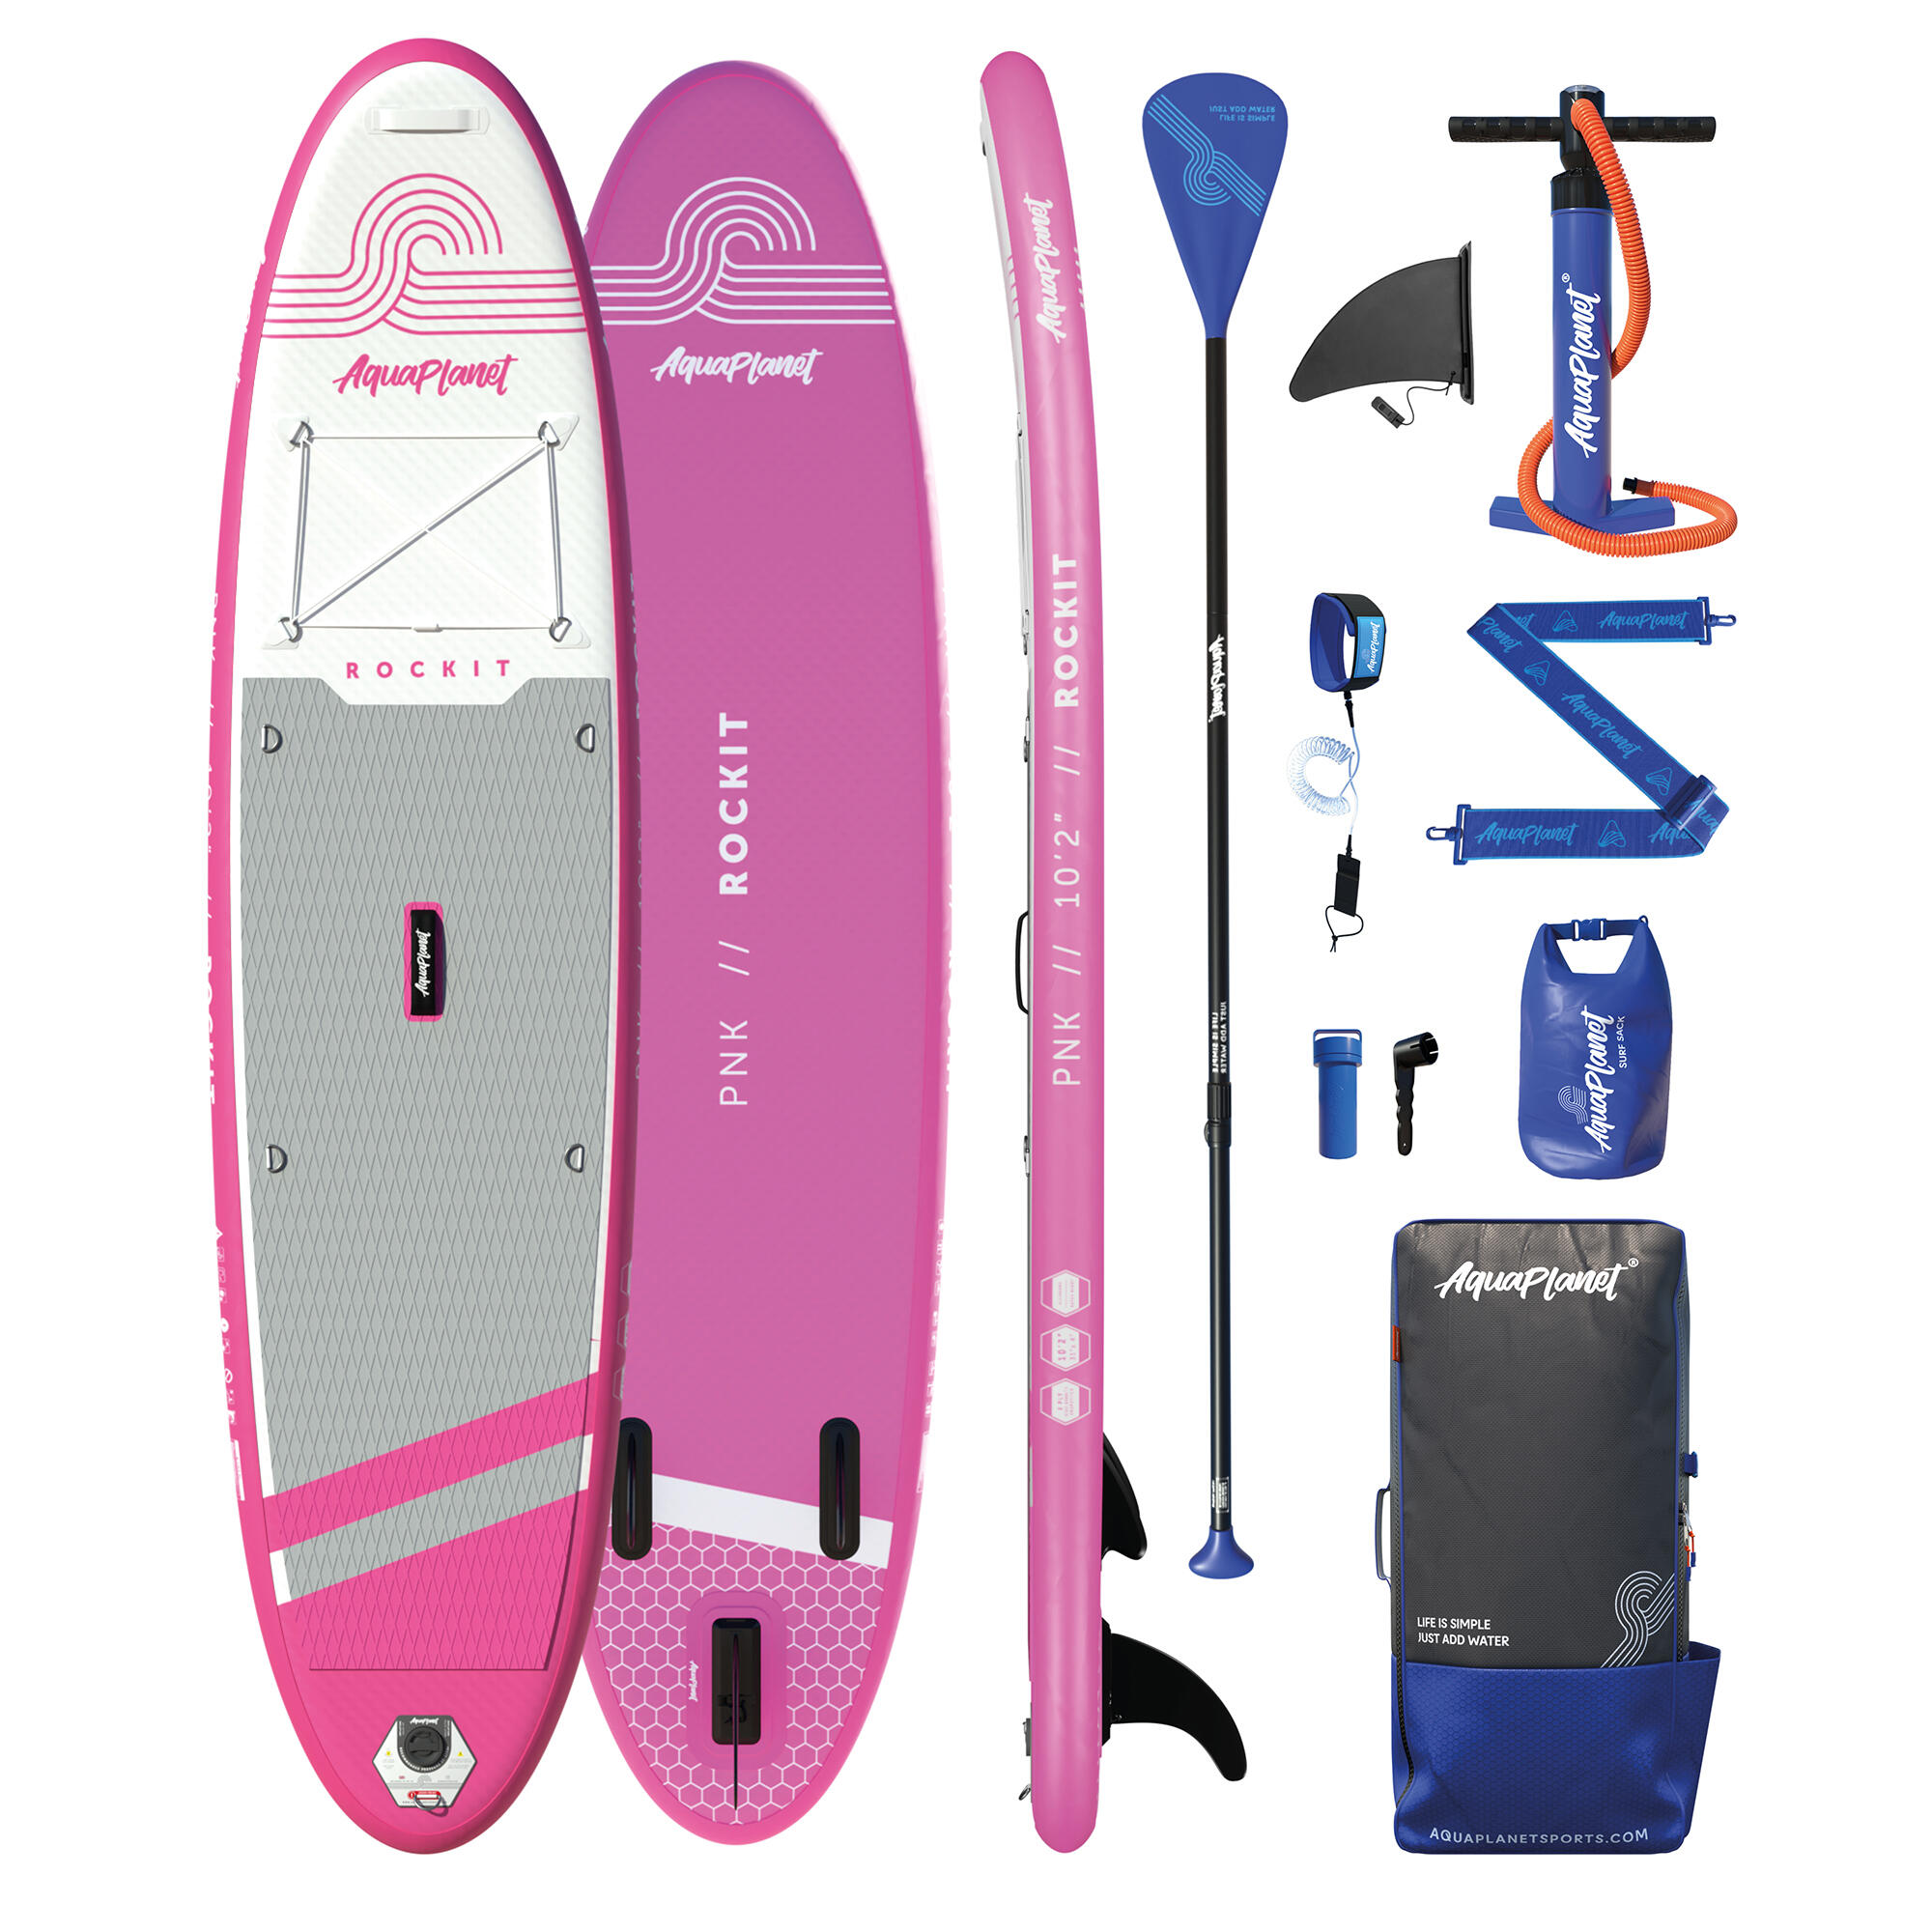 Aquaplanet ROCKIT 10'2 Inflatable Paddle Board Package - Pink 1/6